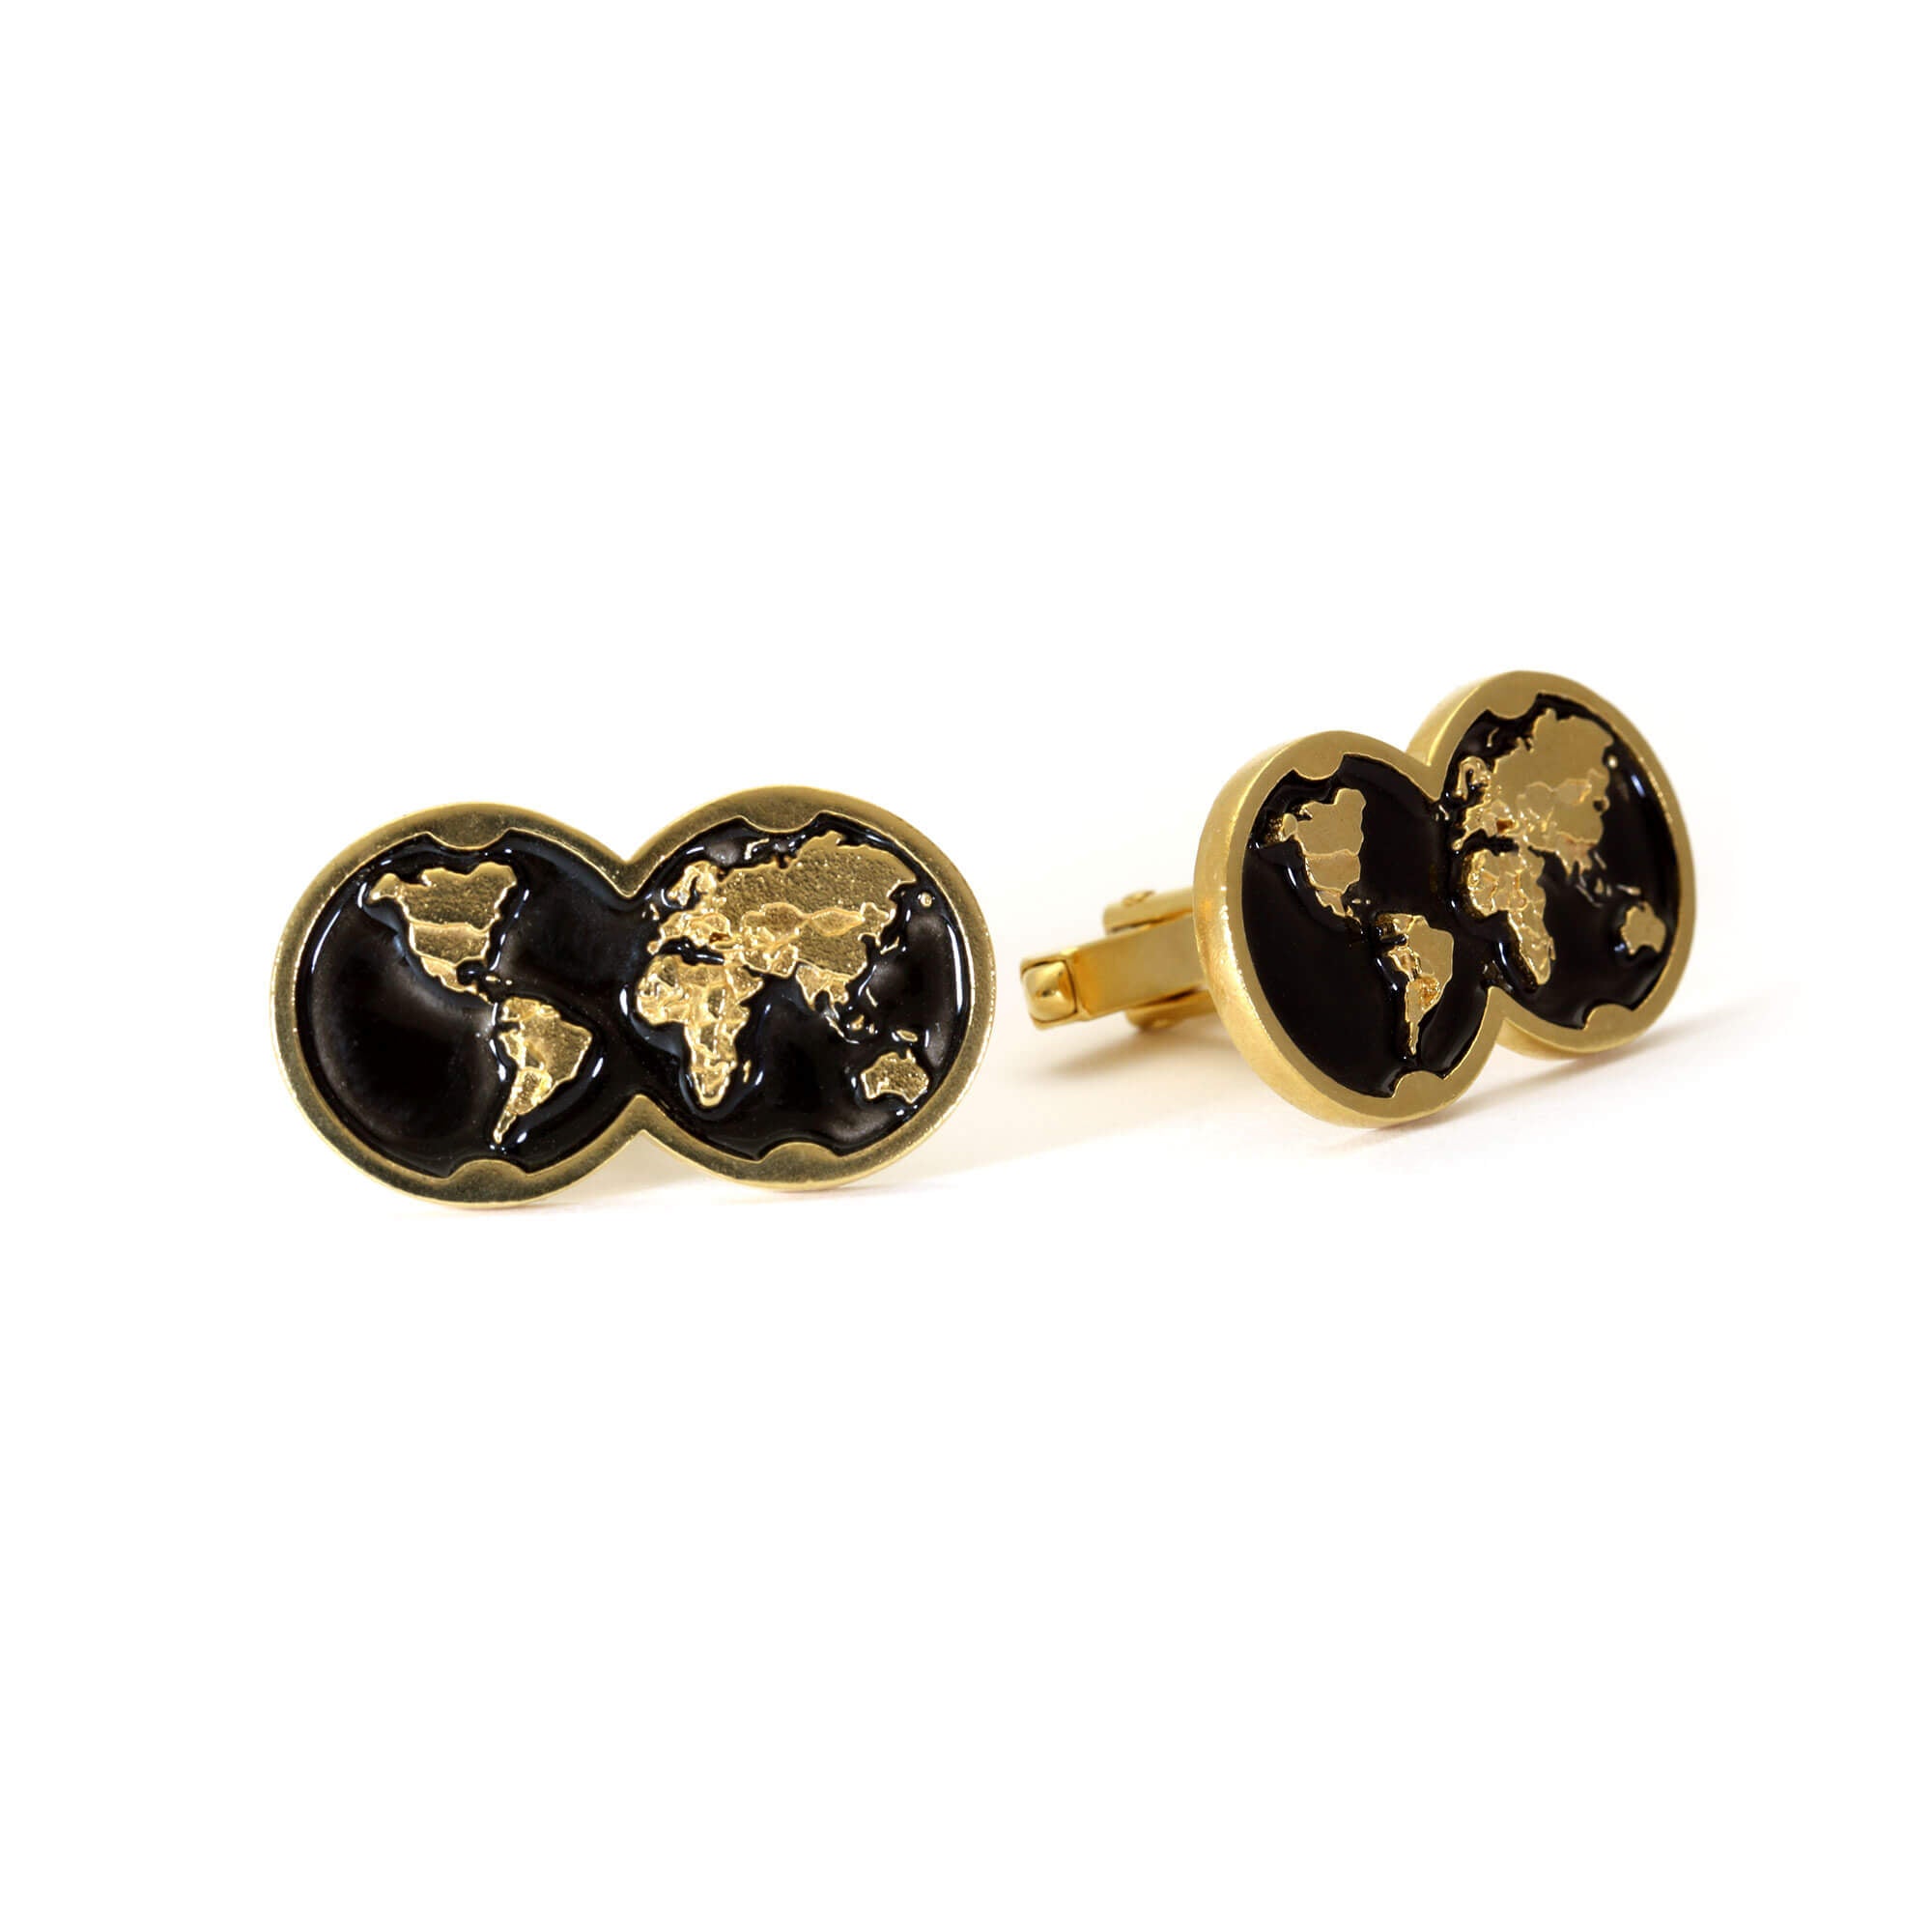 Pair of black enamel and yellow gold cufflink with double globe motif